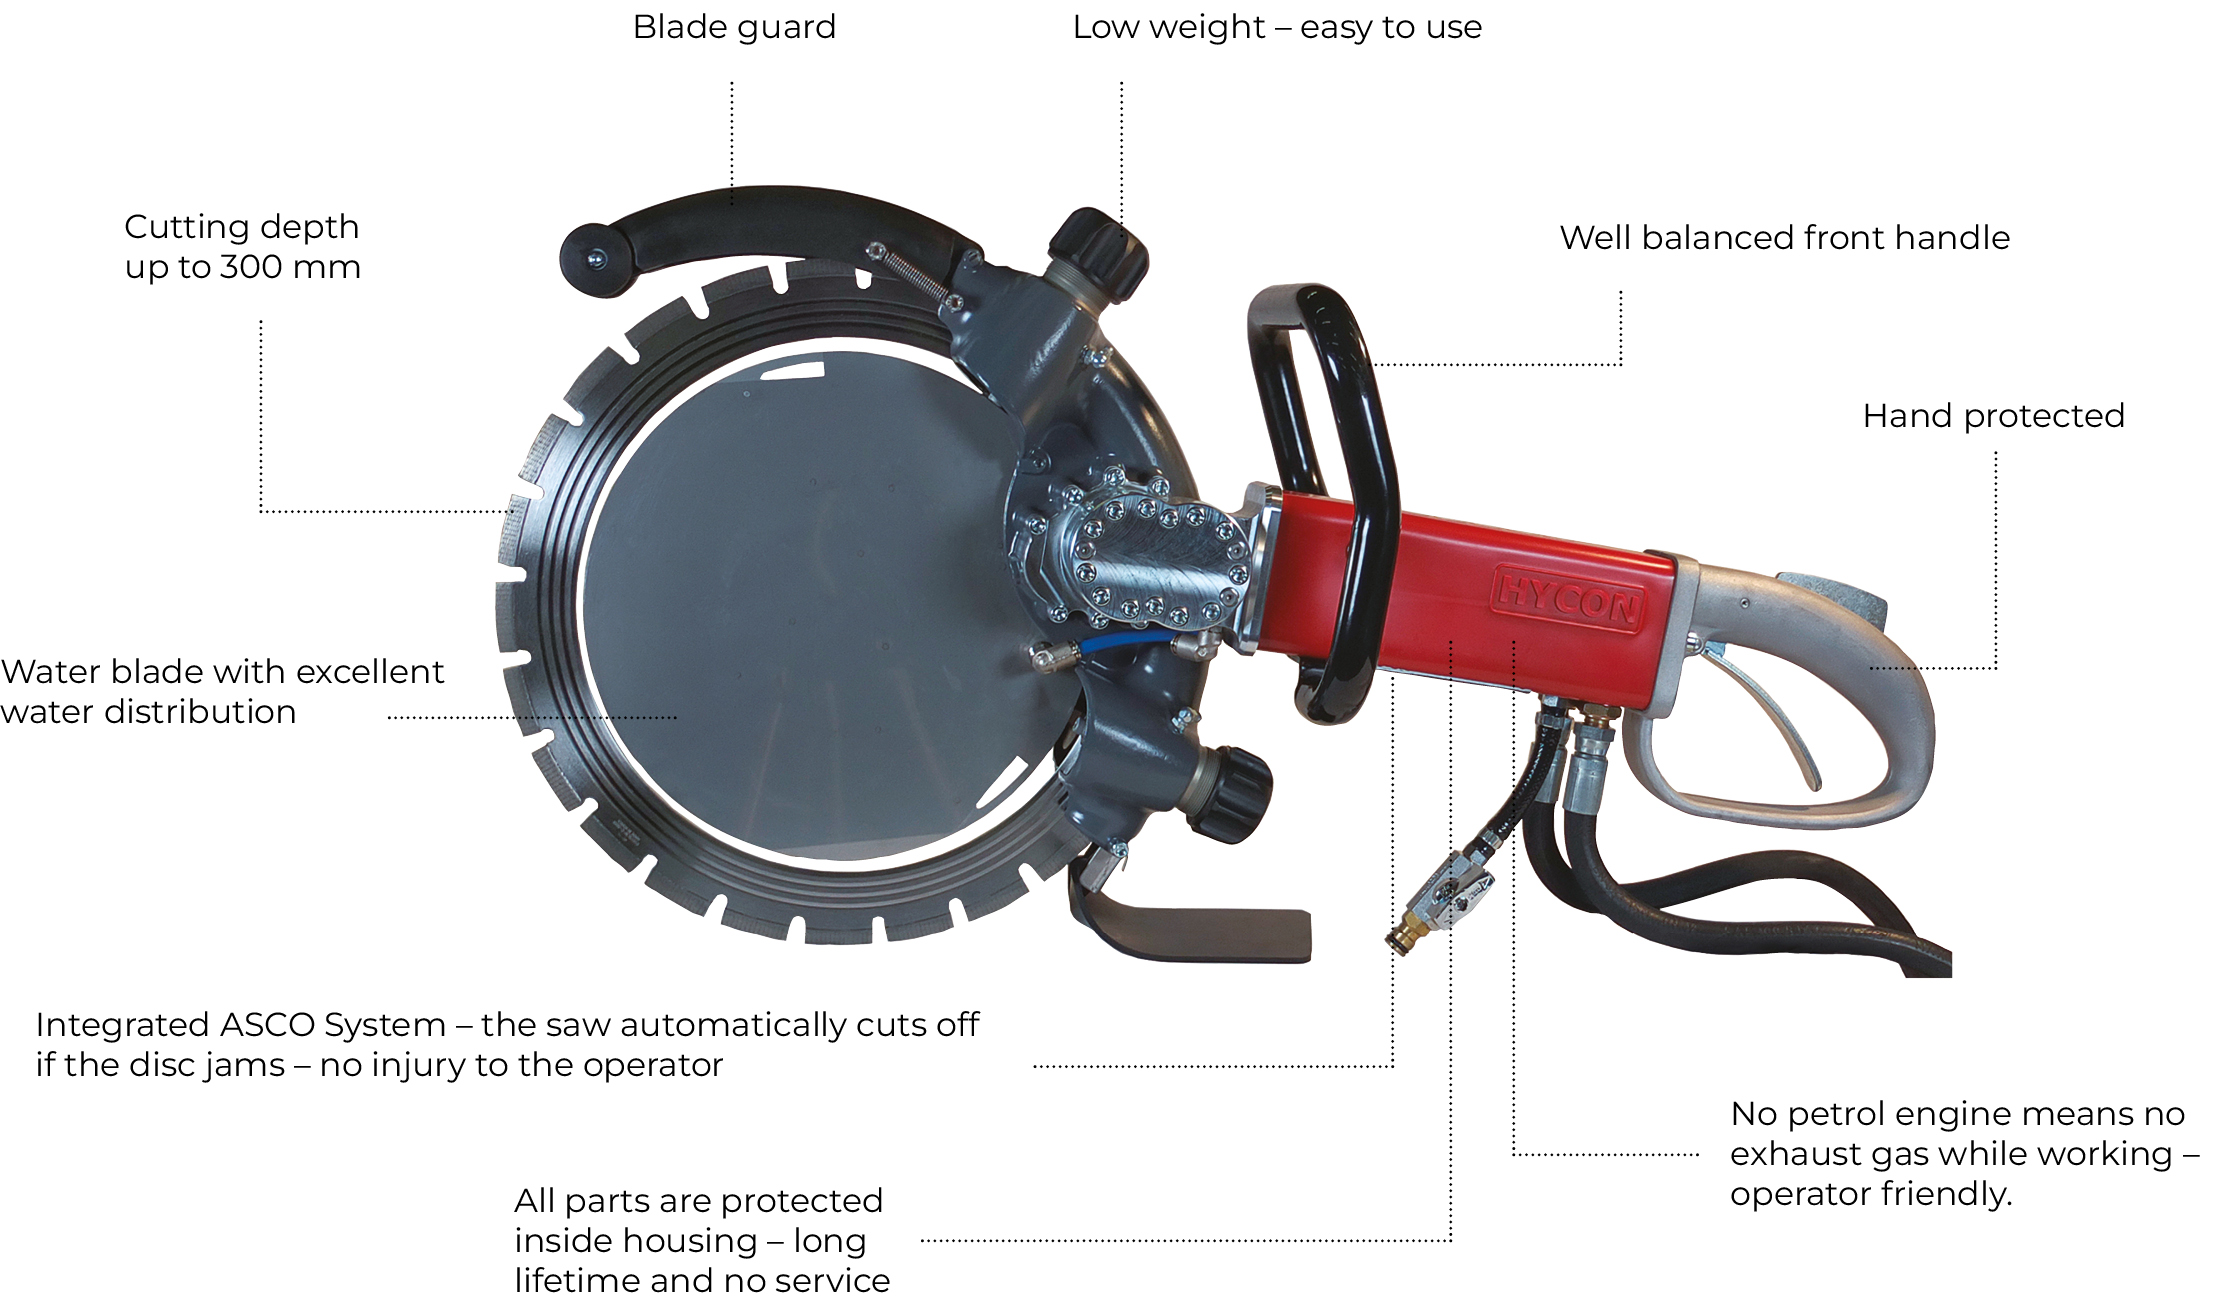 HYCON Hydraulic ring saw with descriptive text